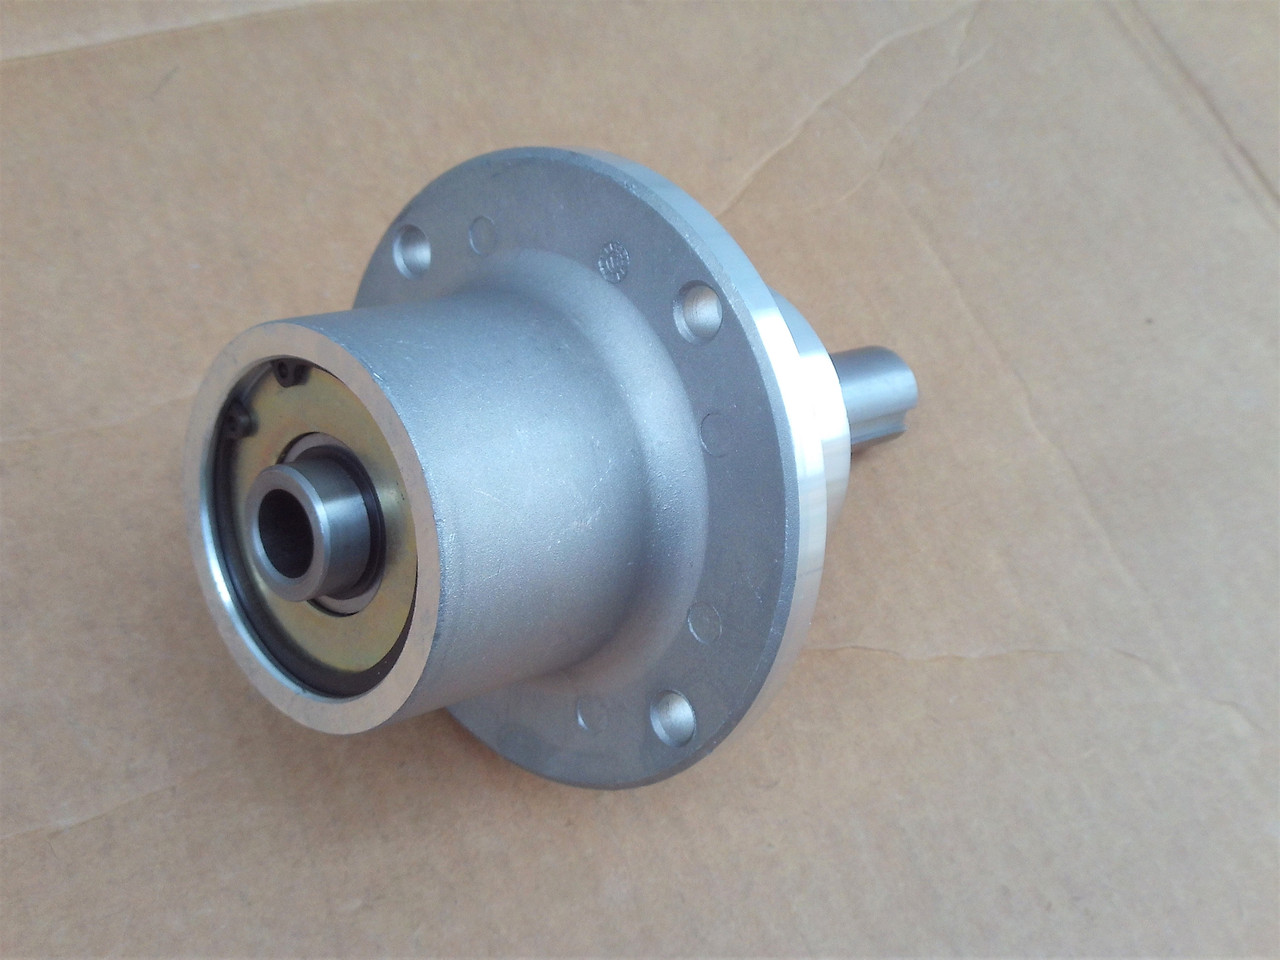 Deck Spindle for Snapper 32" Cut 3036300, 3036300YP